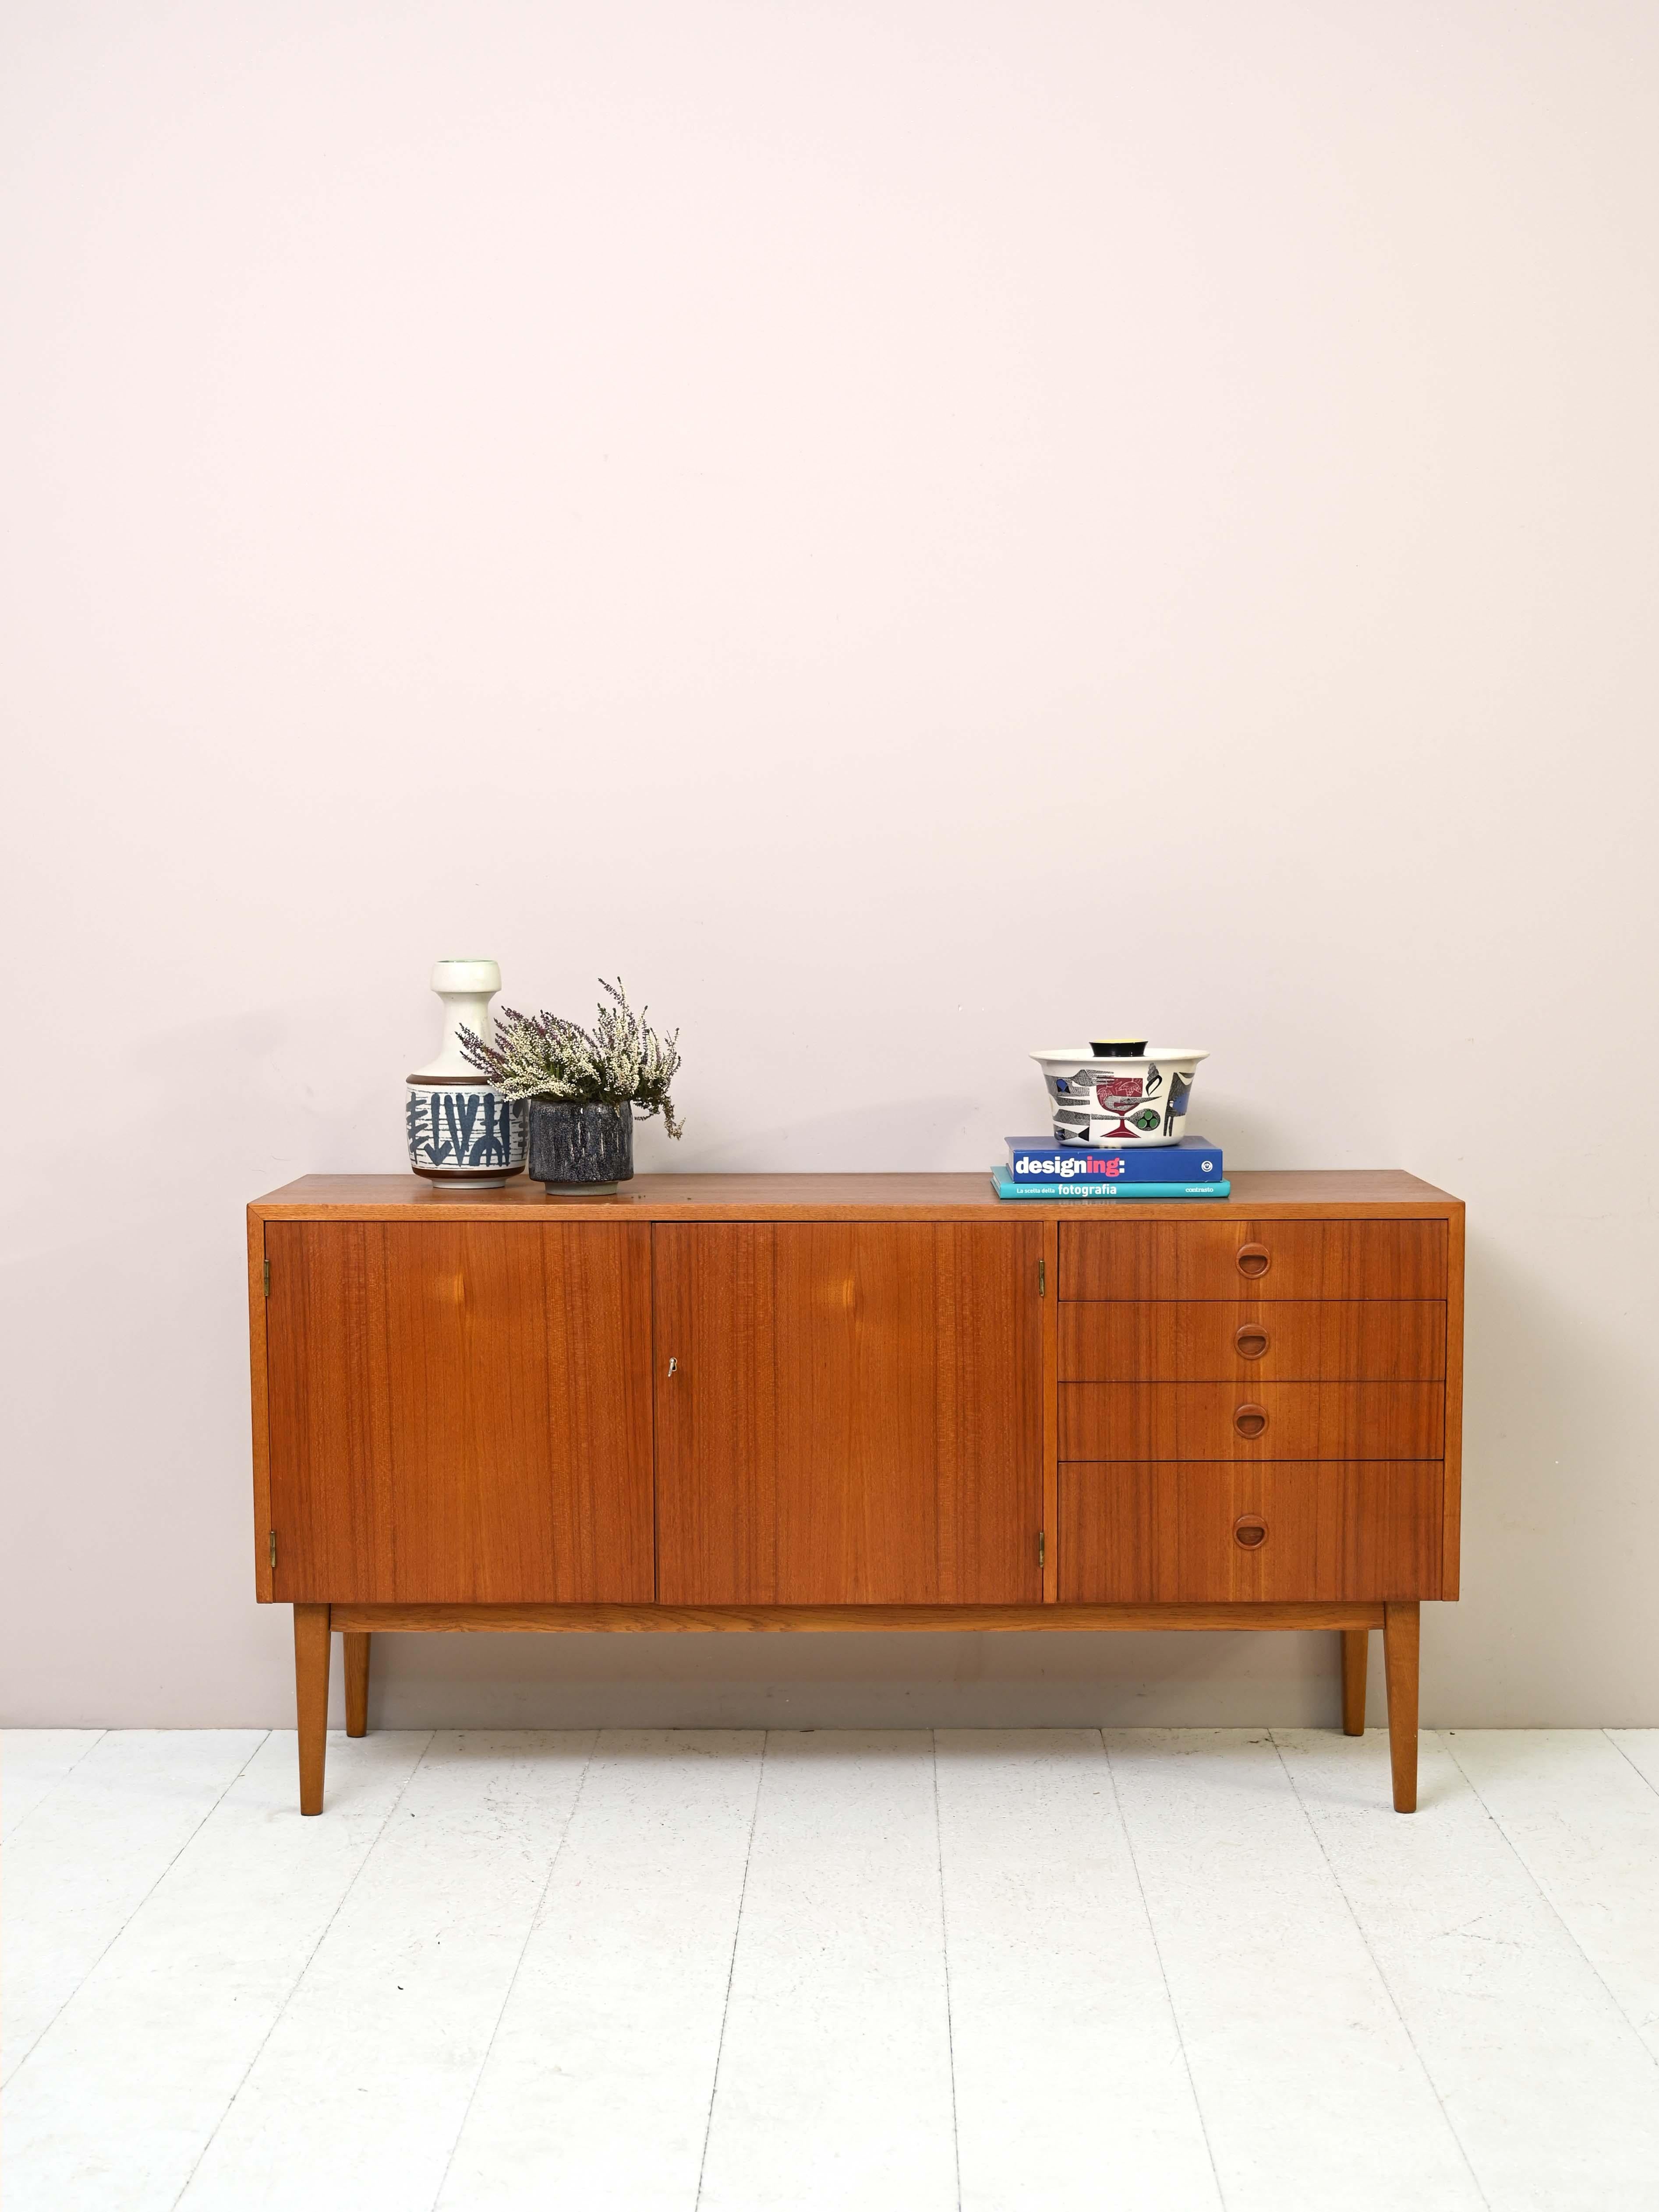 Sideboard of original vintage Nordic manufacture.
This piece of furniture with an understated and minimalist design fits perfectly in already furnished rooms.
It consists of a spacious storage compartment with lockable hinged doors and 4 drawers